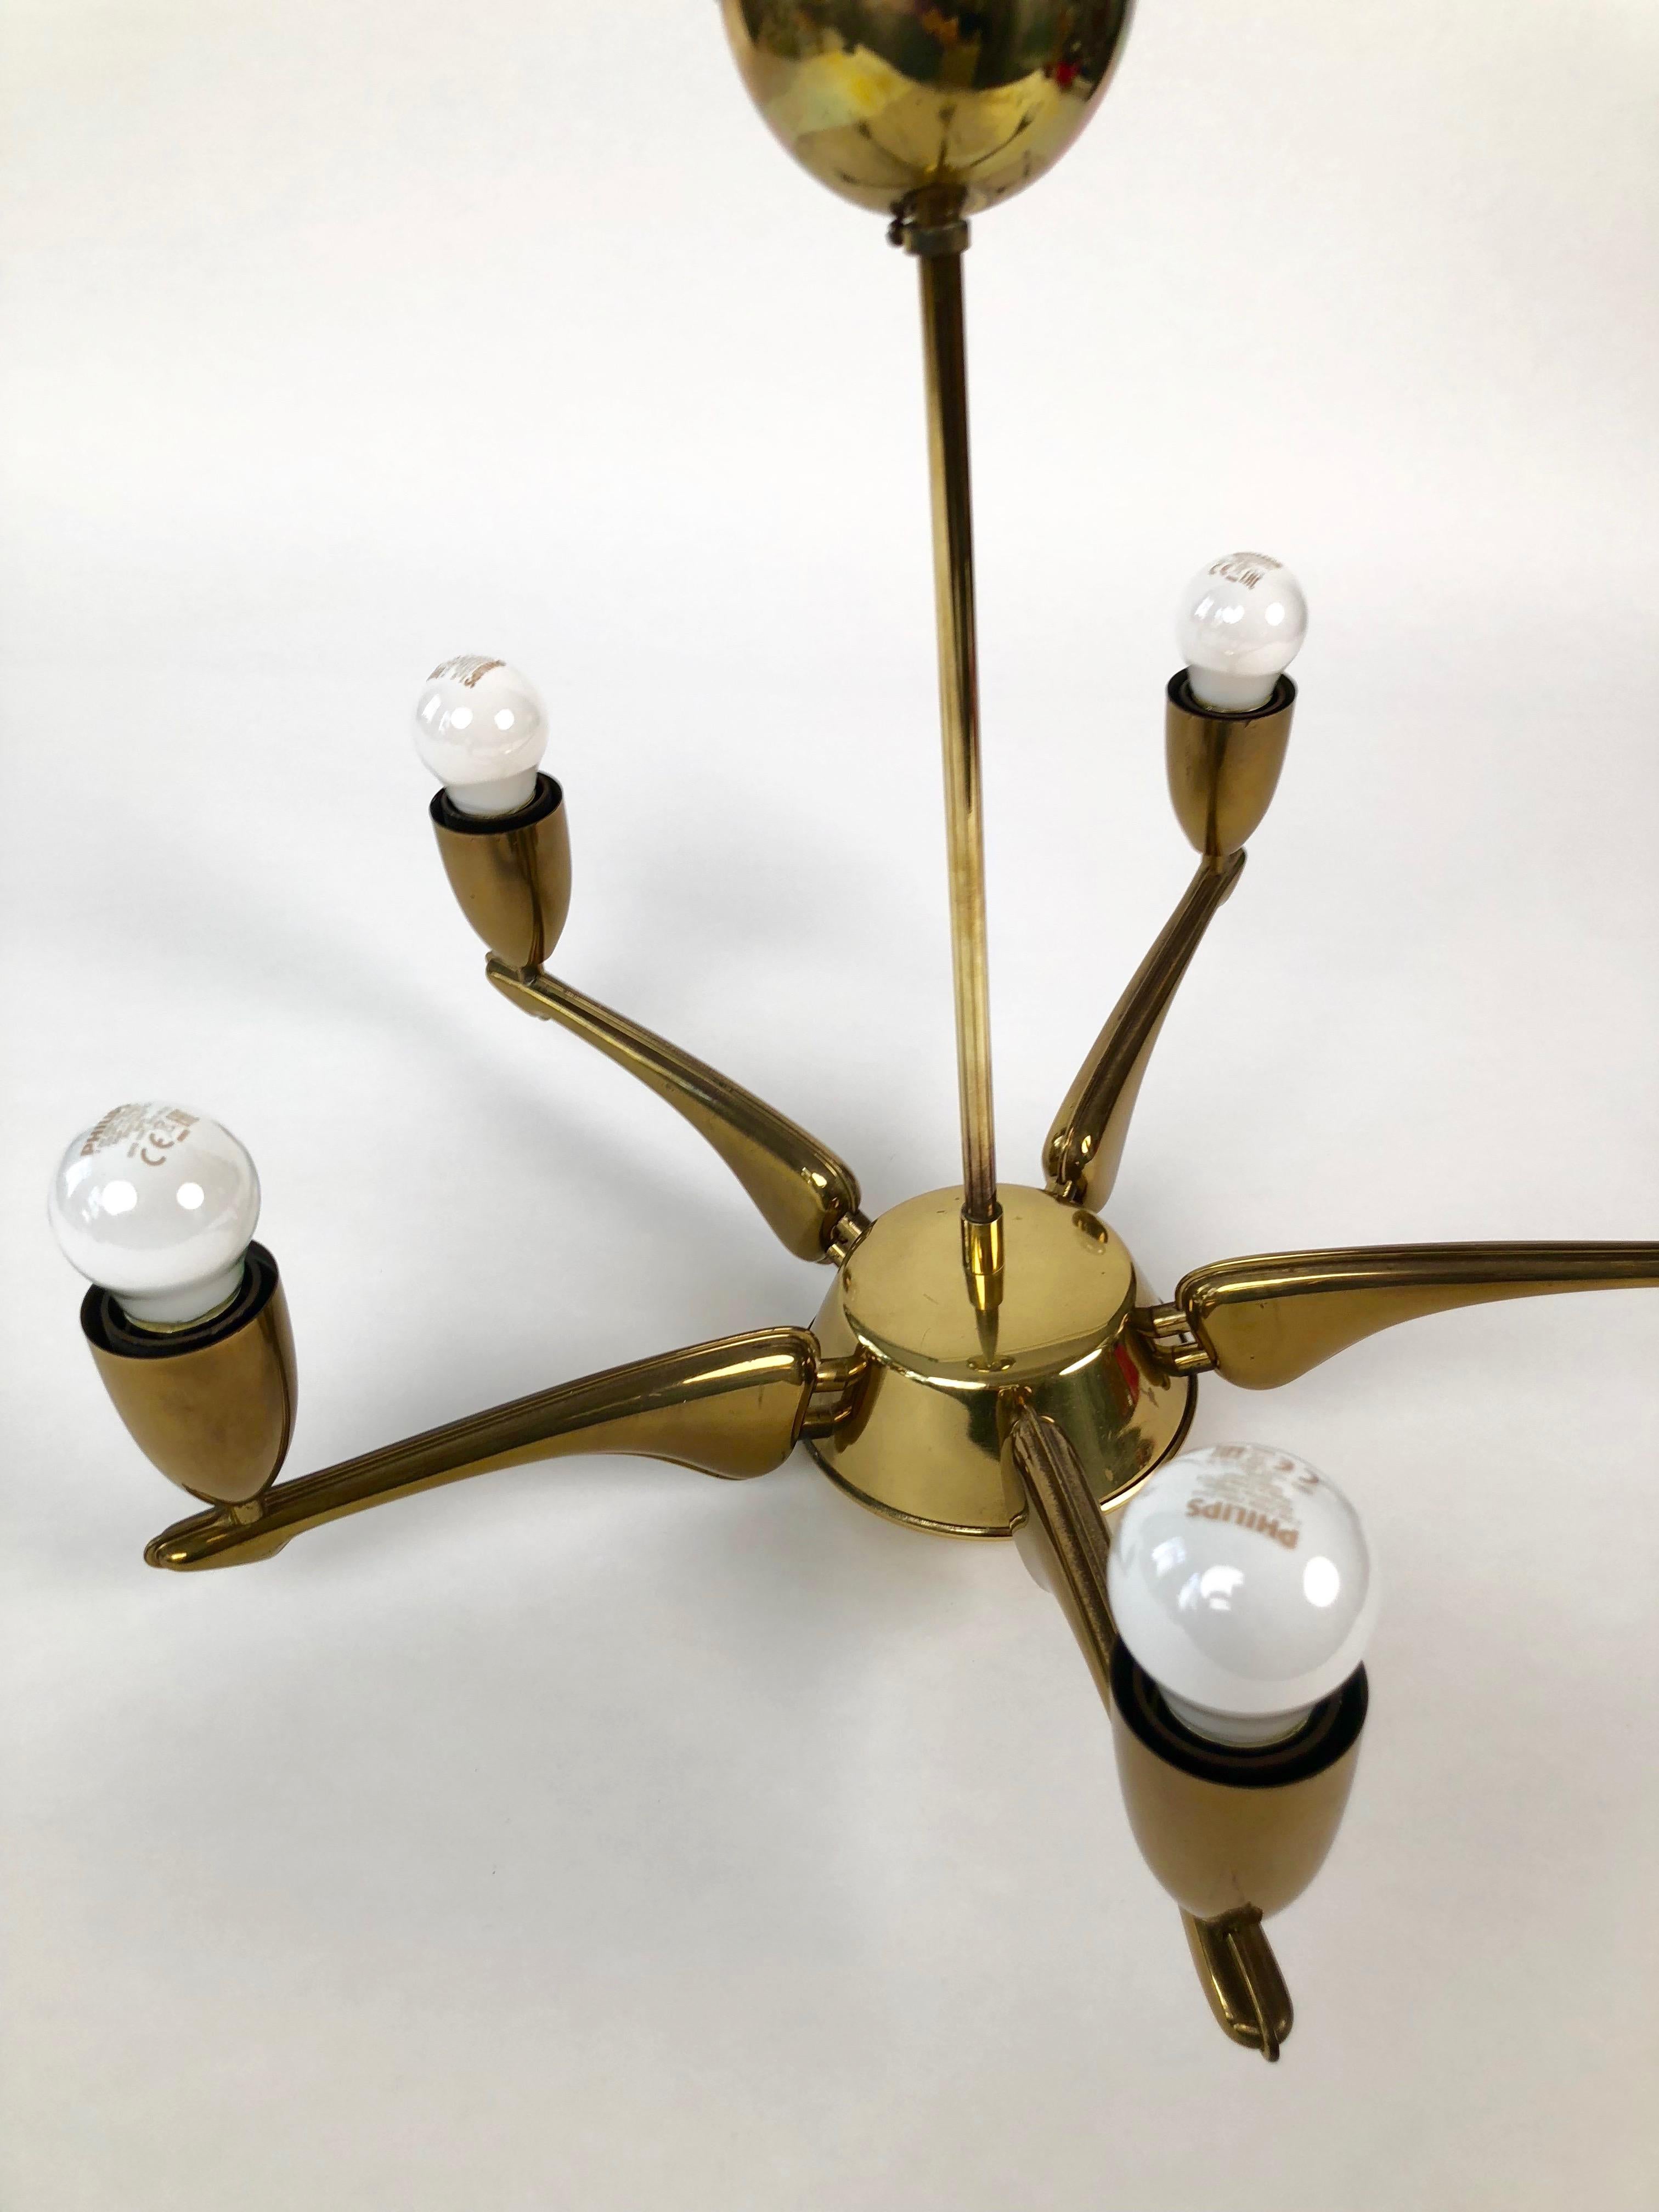 Brass chandelier from 1950s, made in France.
The lamp has 5 lights and has been newly rewired.